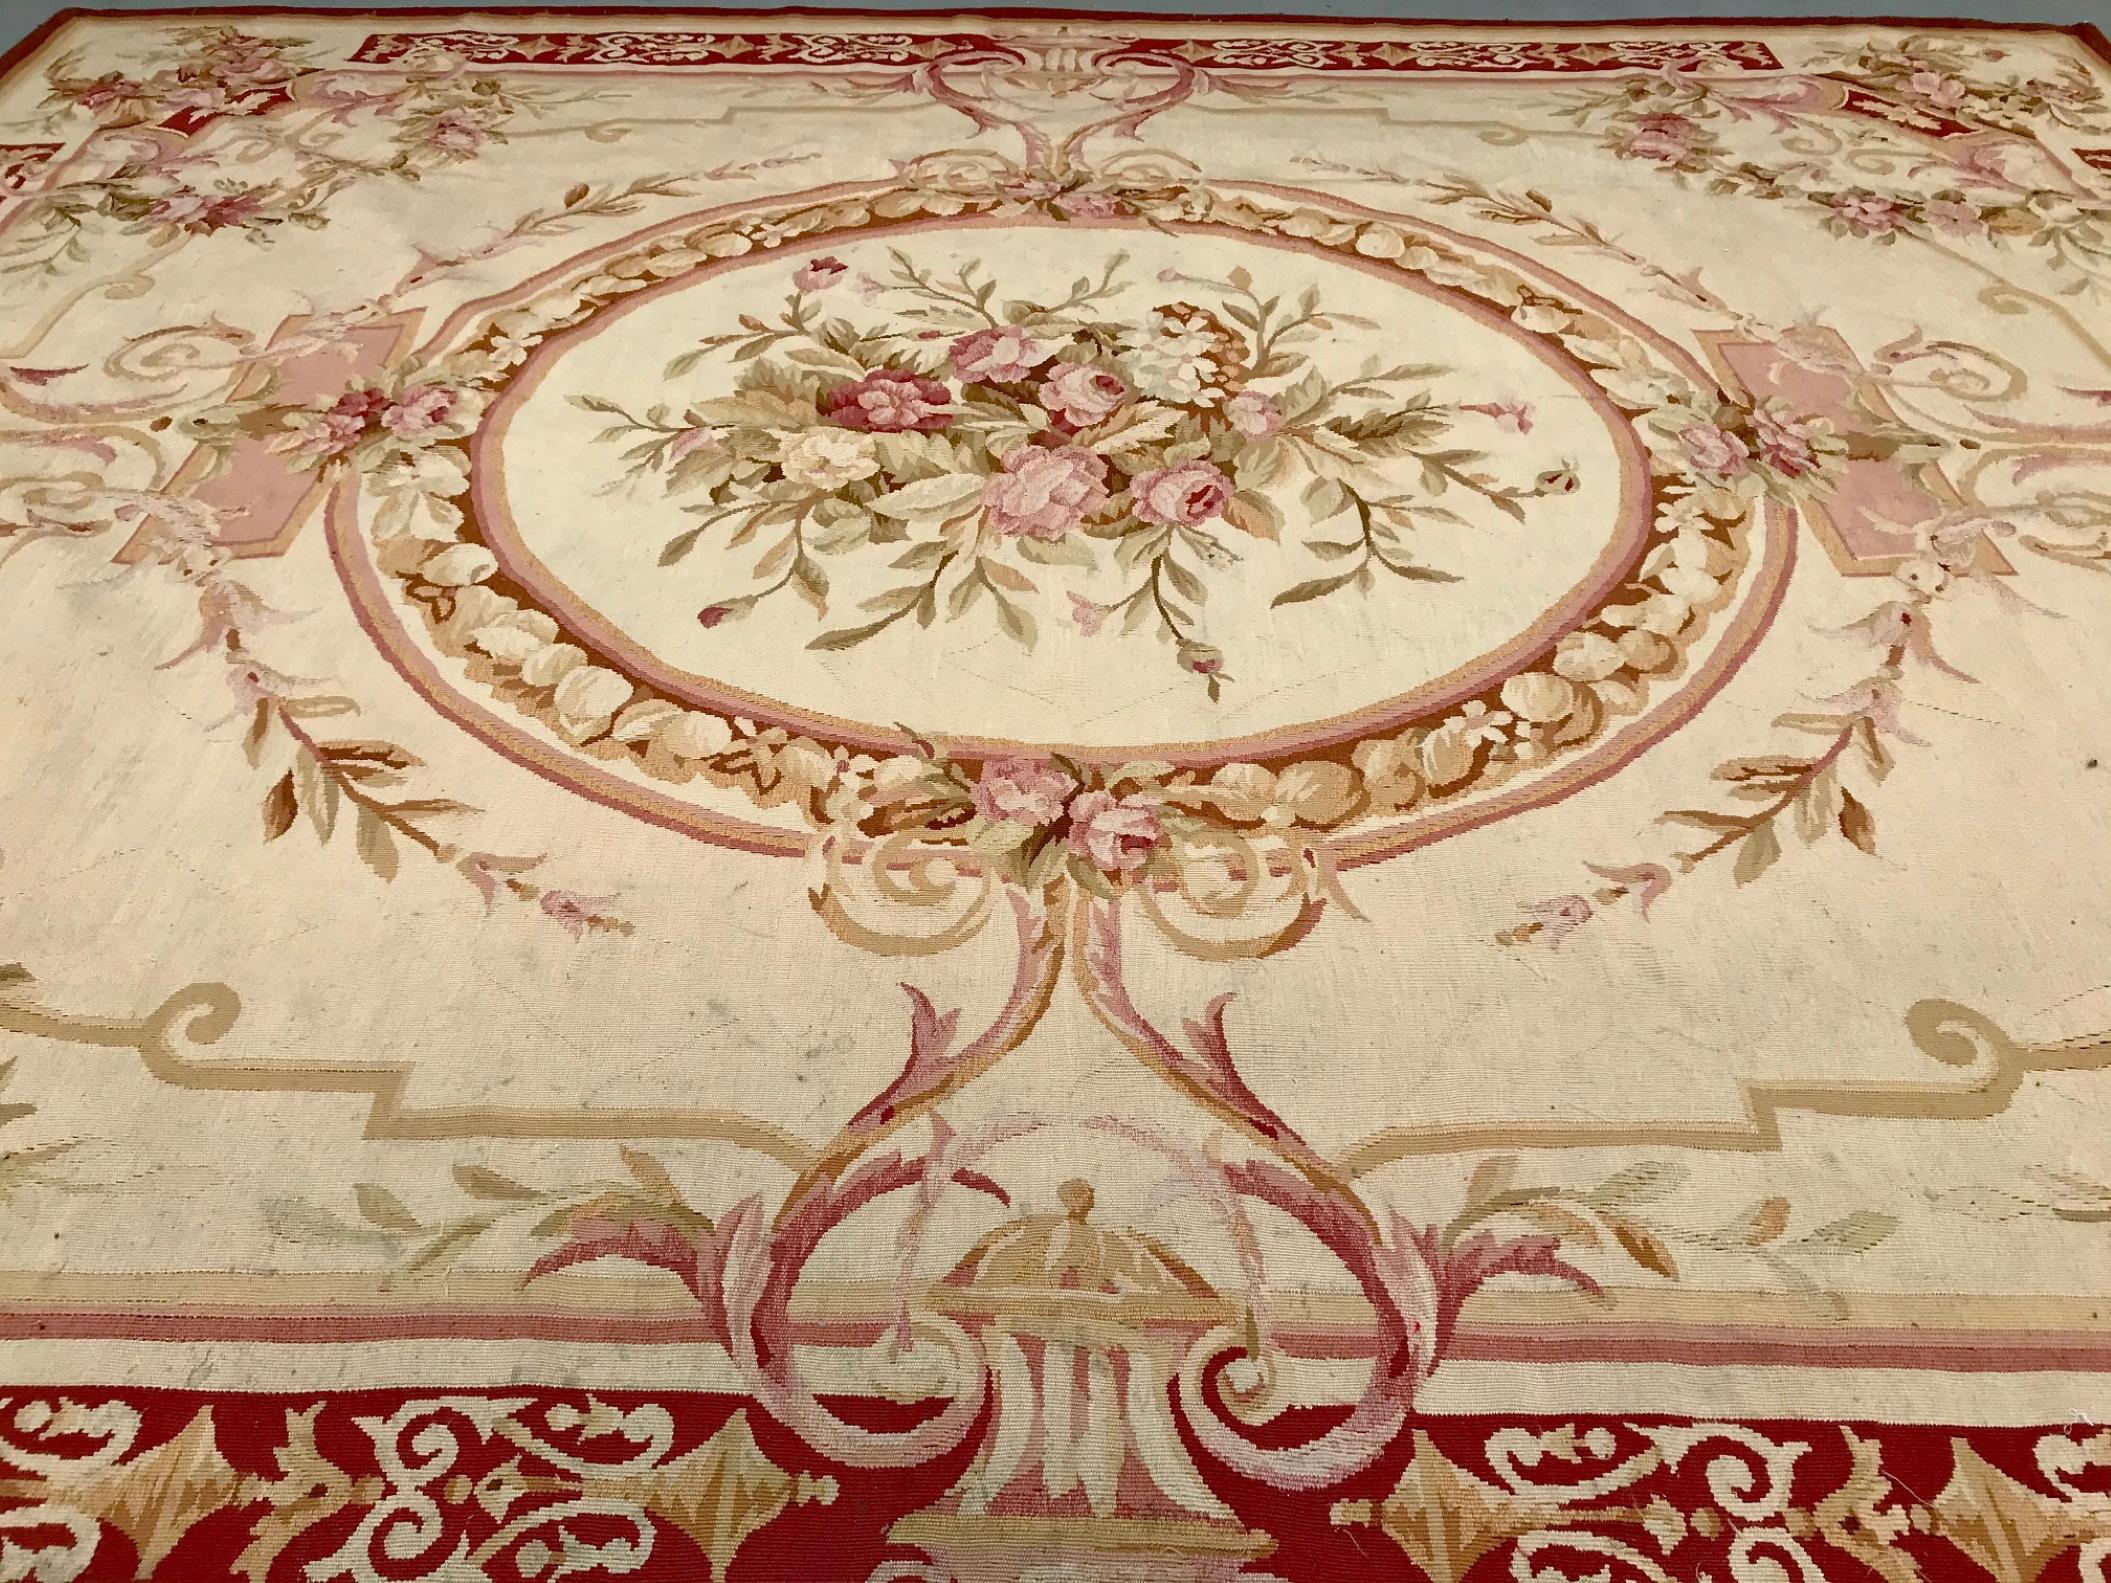 French Aubusson rug, 19th century Napoleon III

Characteristic French Aubusson rug of the late Baroque style. Distinguished by an ivory background, a floral medallion, defined by sinuous Rococo scrolls with elegant ornamentation of flowers, floats